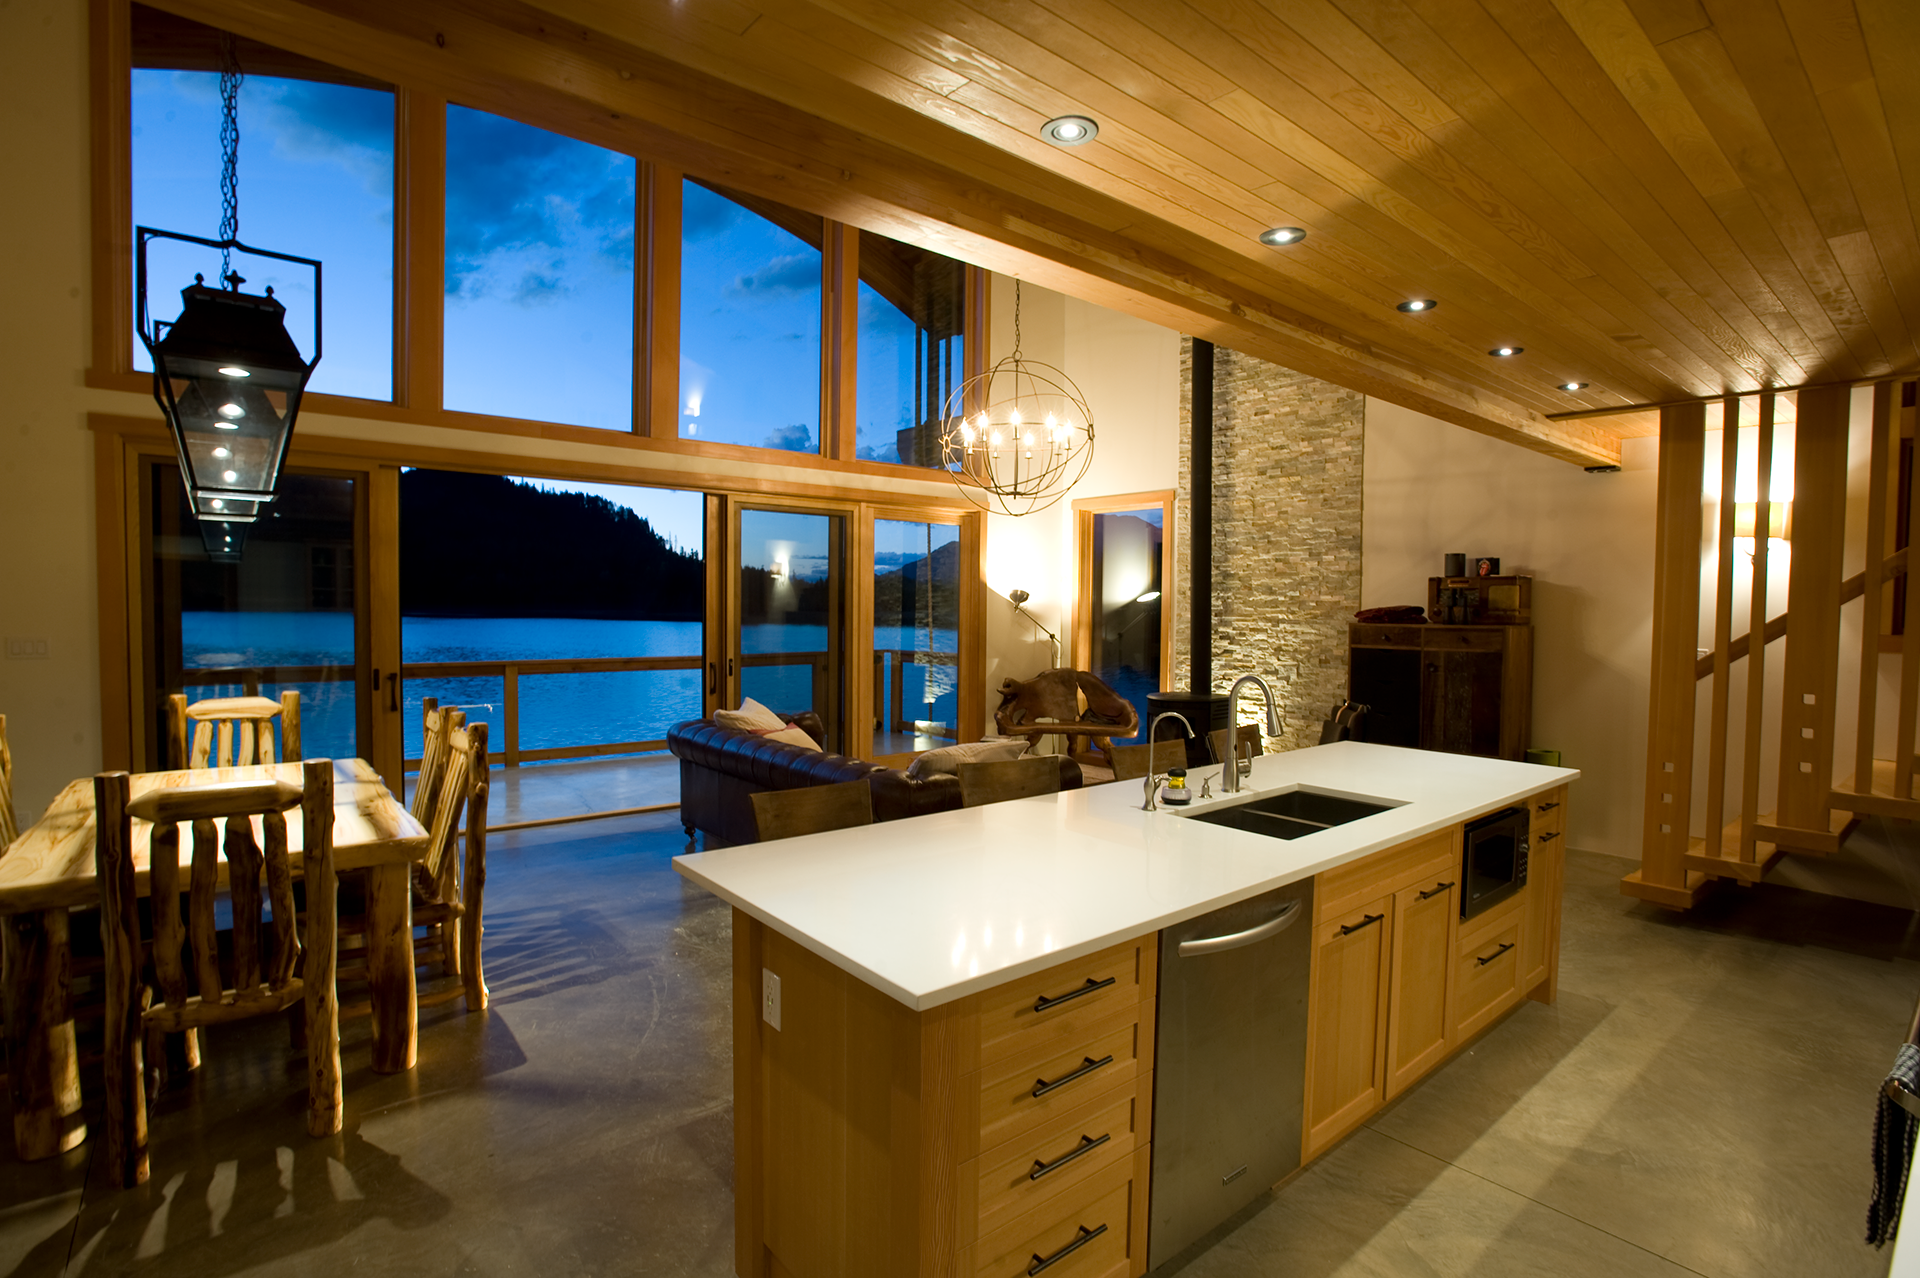 kitchen bar, dining, and living area with a view of the lake outside